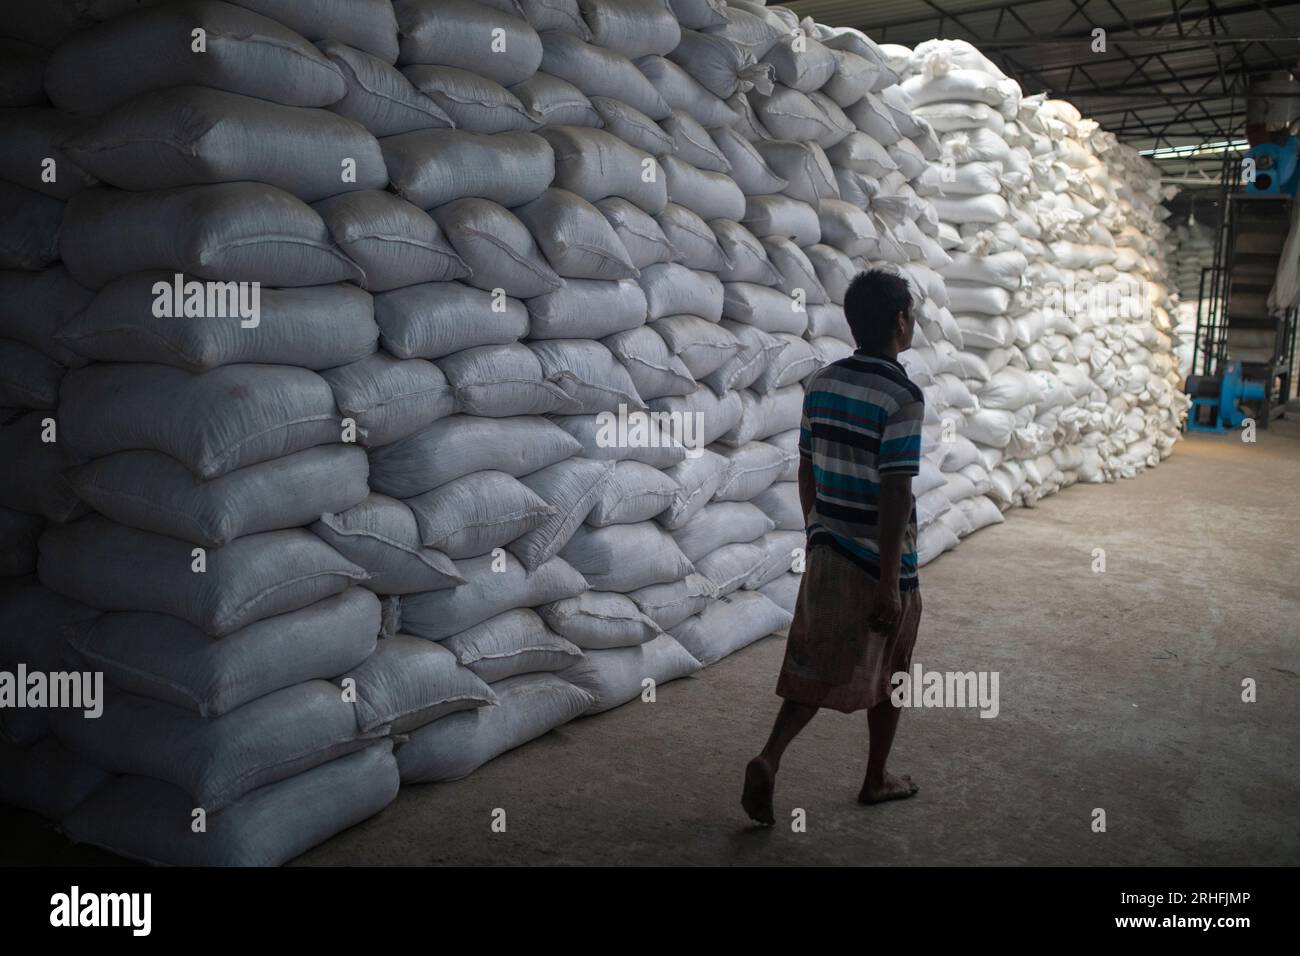 Sacks of plastic flakes made by used plastic bottles at a recycling plant in Dhaka, Bangladesh. Stock Photo